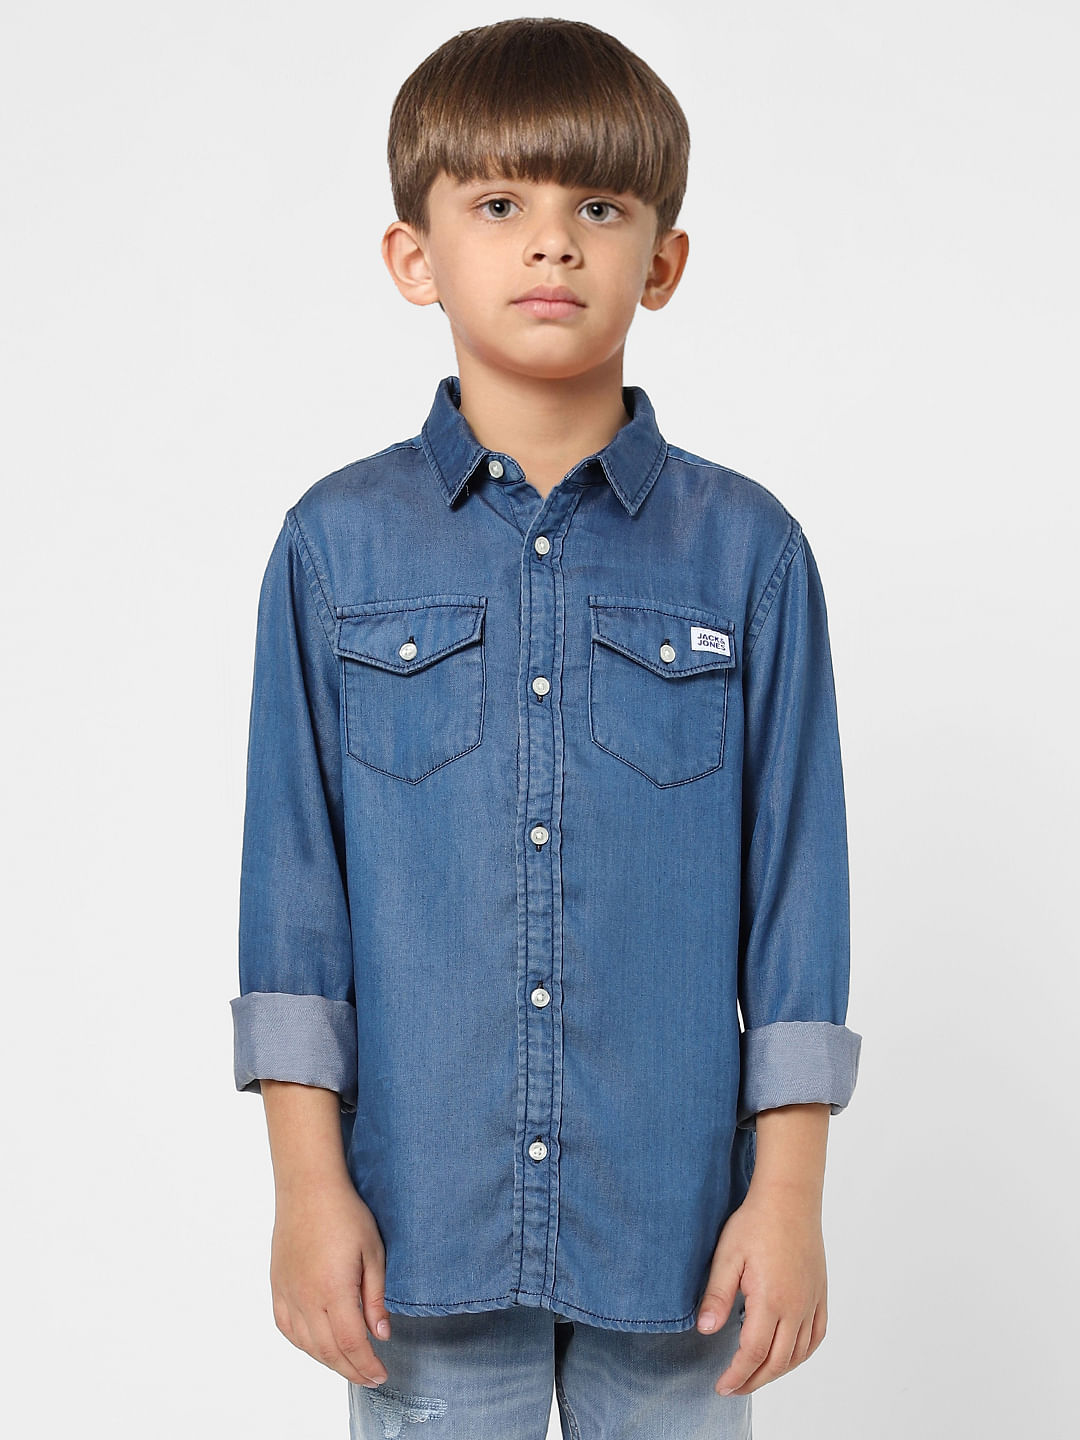 Buy Pacific Blue Denim Shirt for Men Online in India -Beyoung